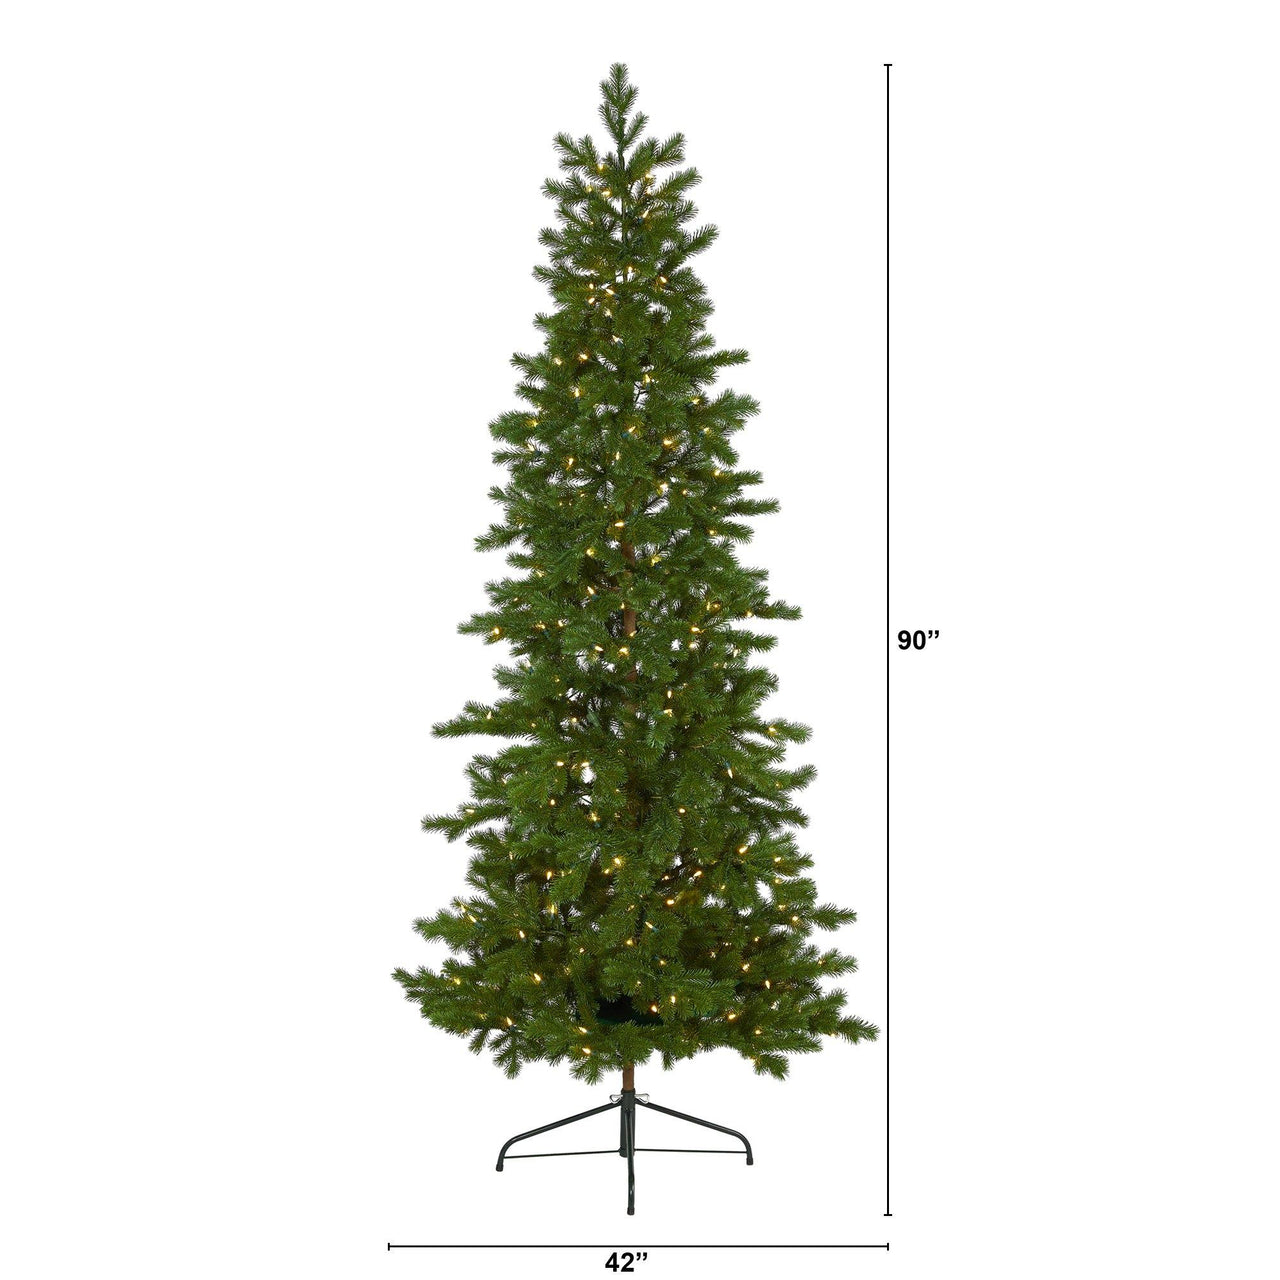 7.5' Big Sky Spruce Artificial Christmas Tree with 300 Clear Warm (Multifunction) LED Lights and 385 Bendable Branches - The Fox Decor